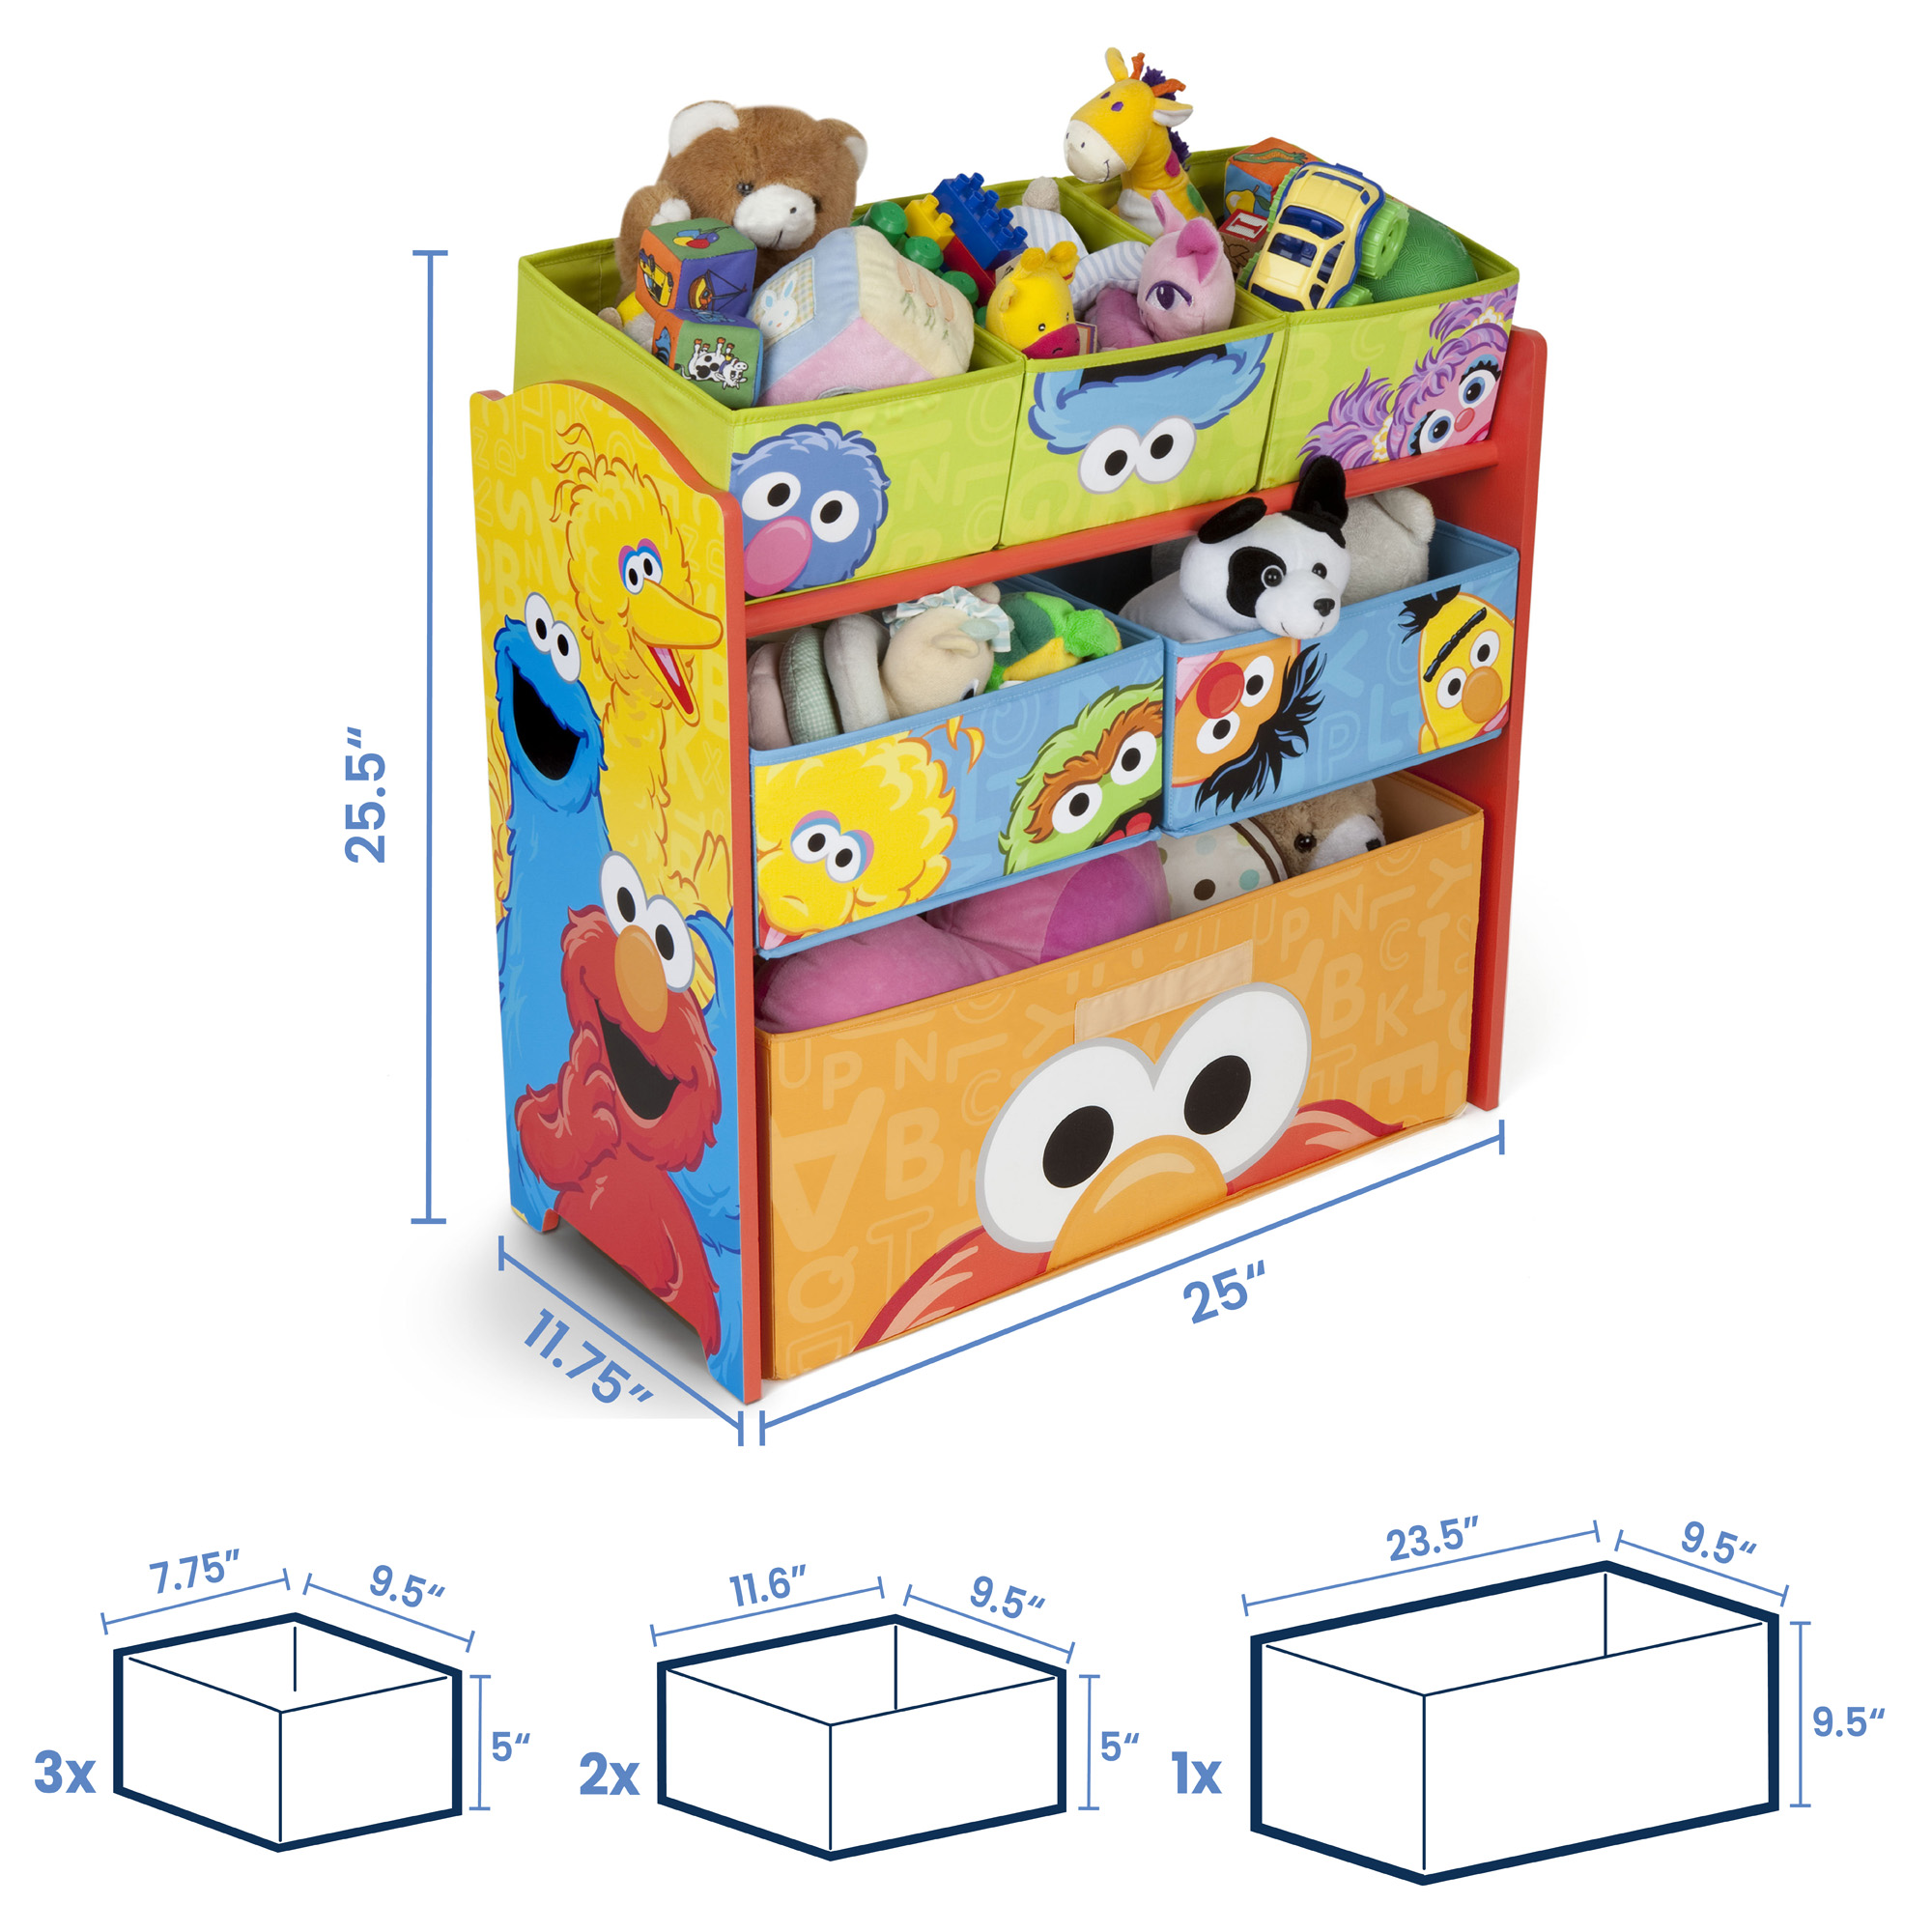 Sesame Street 6 Bin Design and Store Toy Organizer by Delta Children - Durable Engineered Wood, Solid Wood and Fabric Construction, Multi Color - image 3 of 8